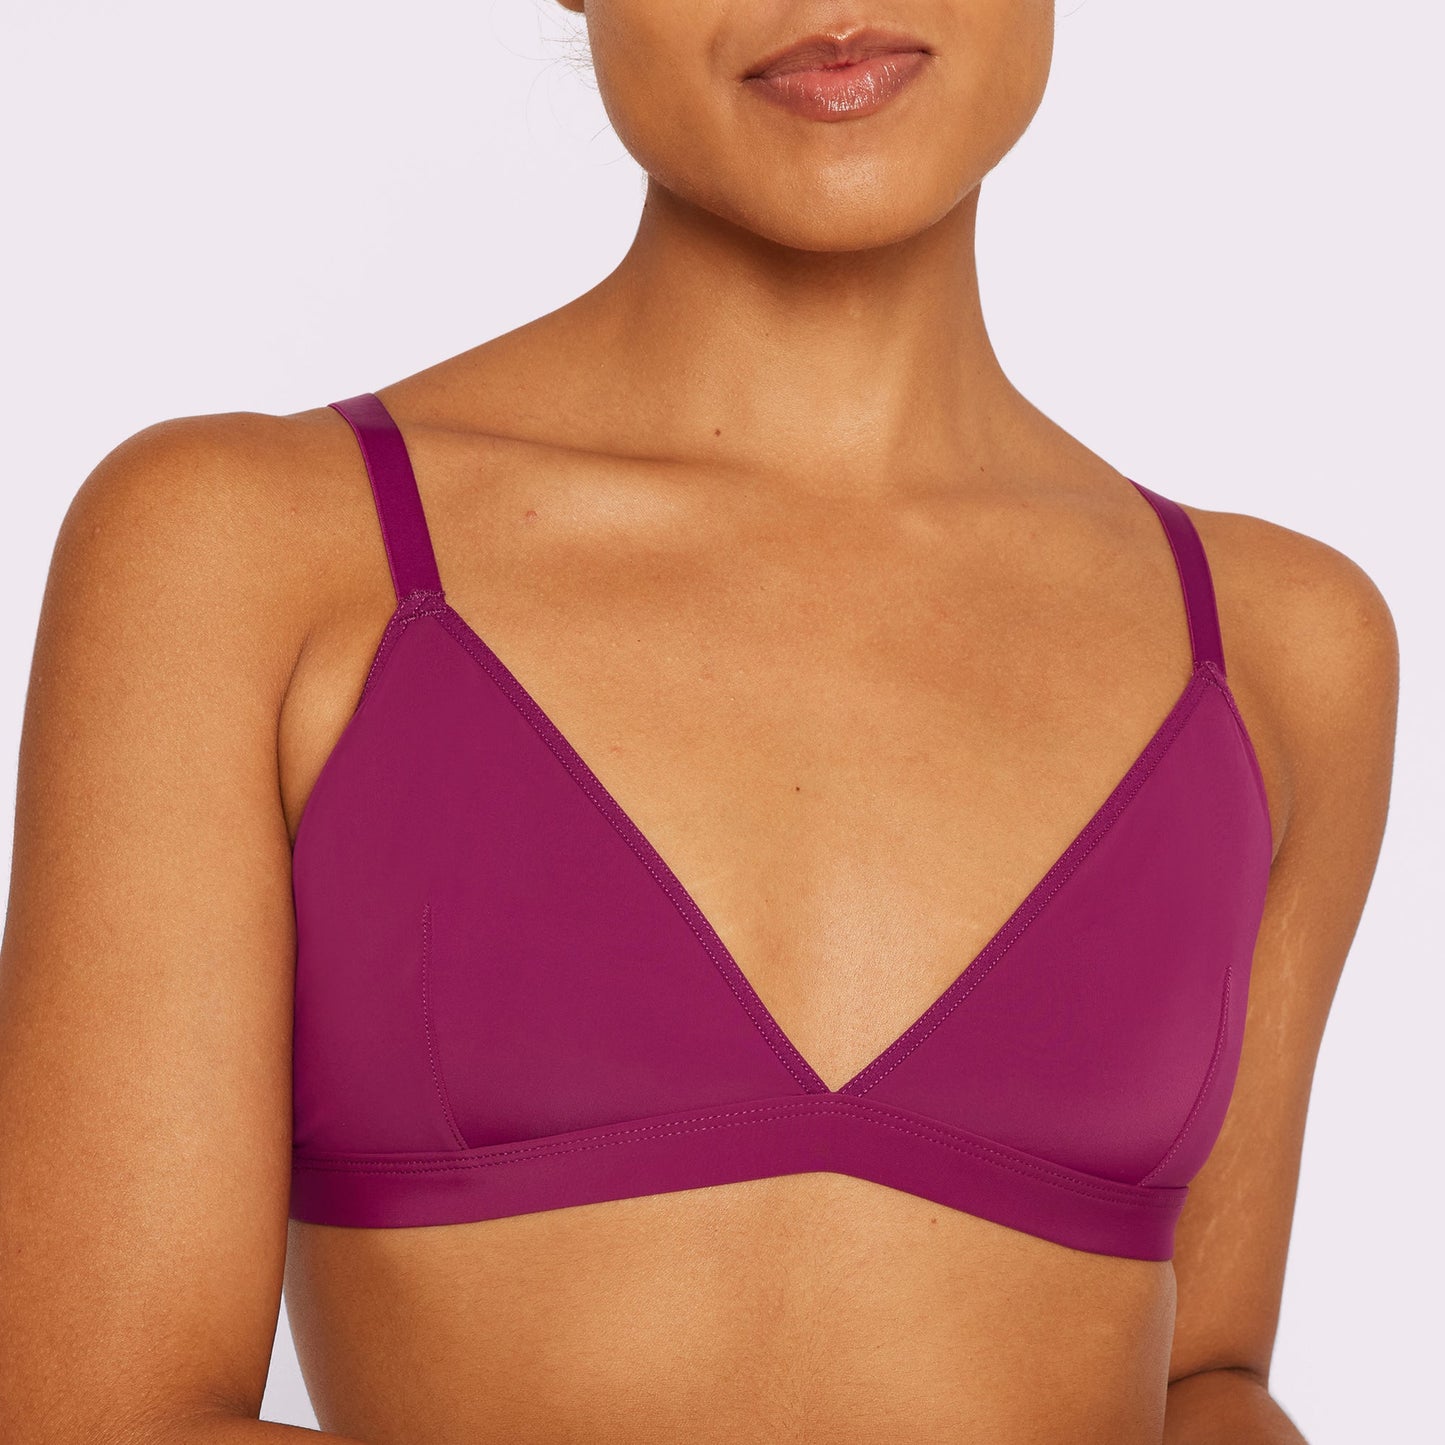 Is a Size 6 Considered Medium in Lululemon Apparel? - Playbite